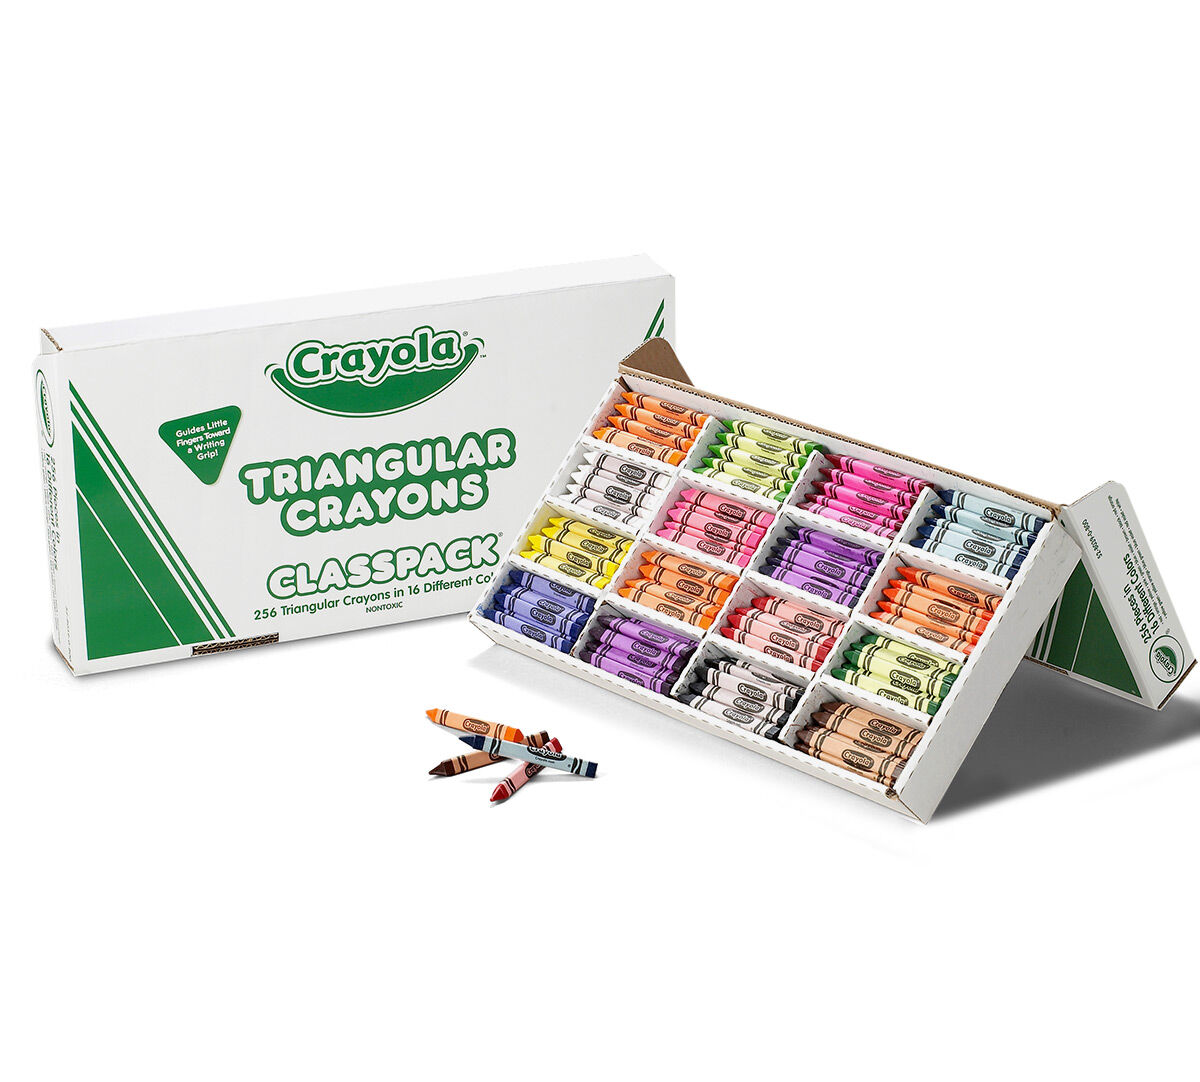 Crayola Bulk Markers and Crayons 256 Count Classpack